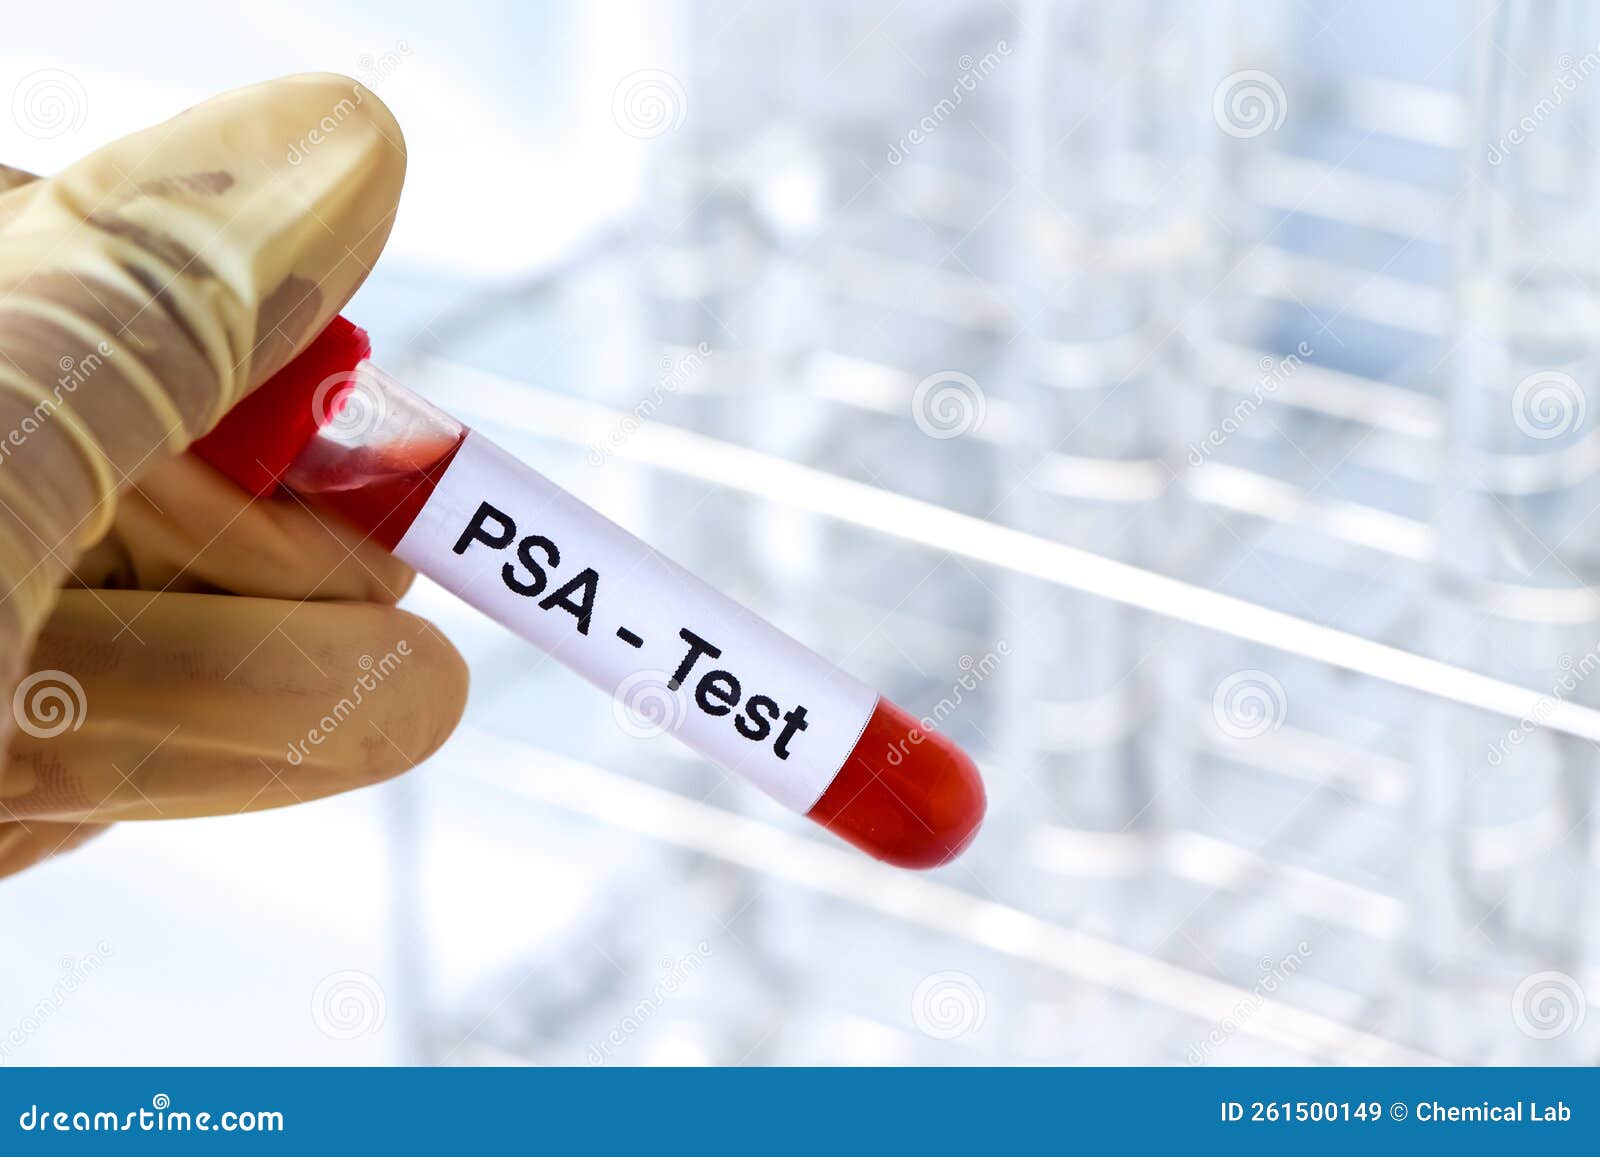 PSA Test To Look for Abnormalities from Blood Stock Image - Image of ...